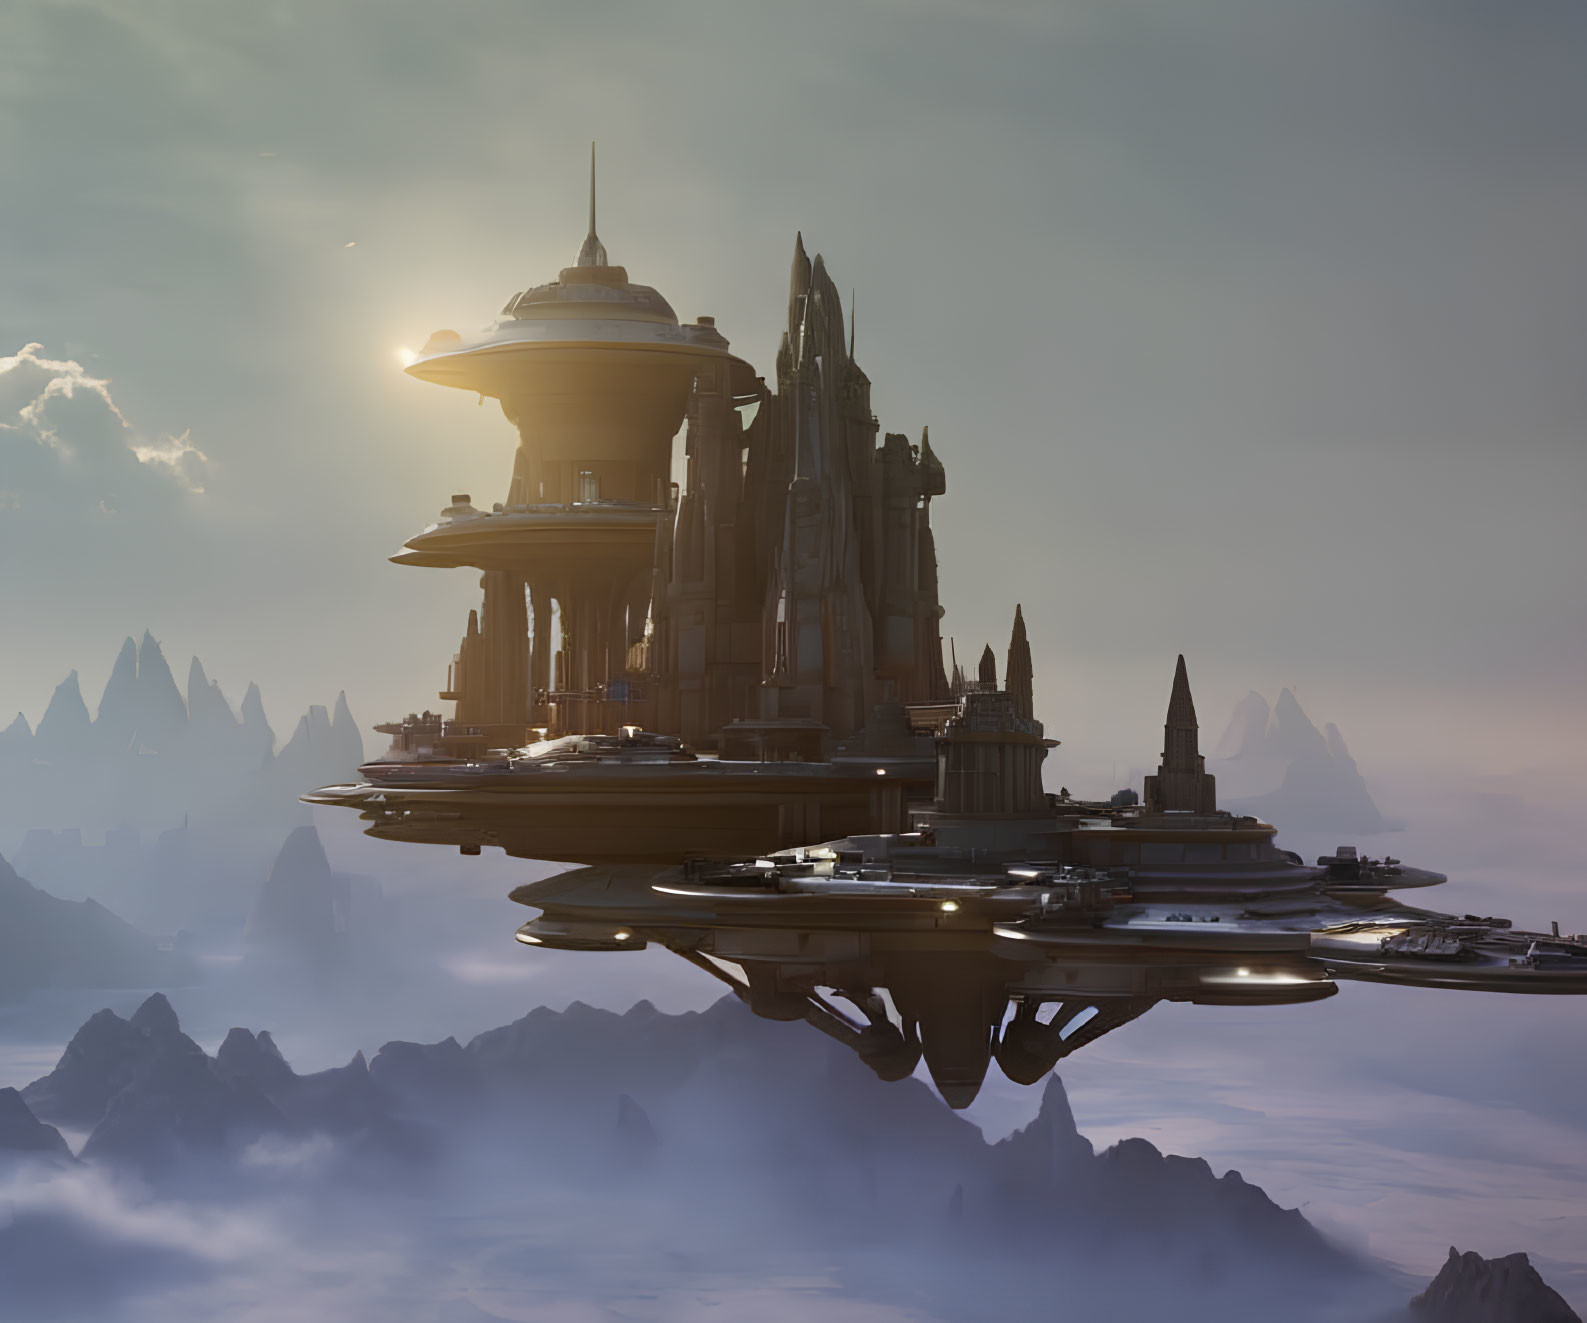 Futuristic city with towering spires above misty mountain peaks